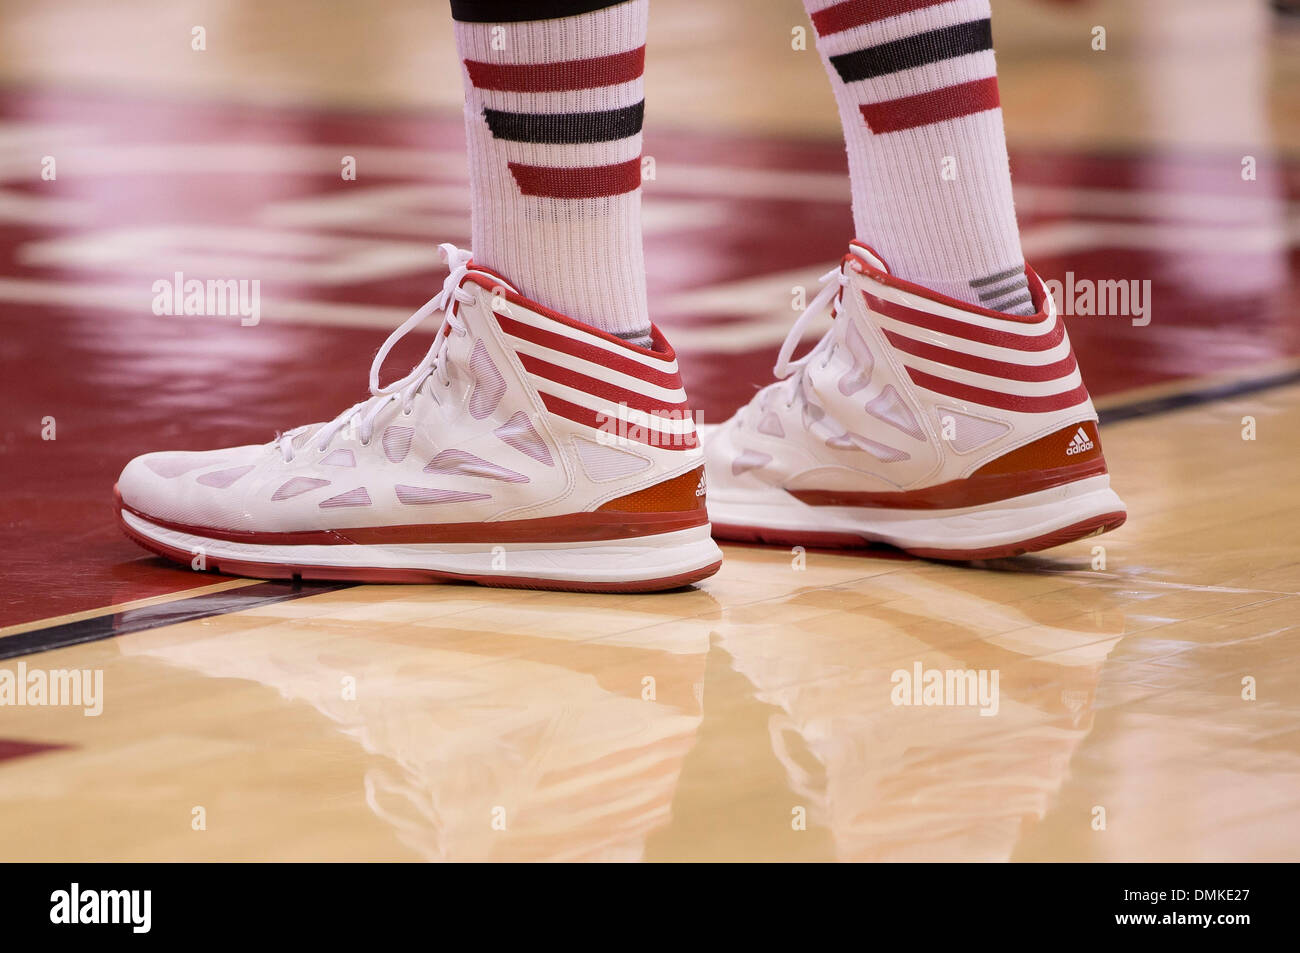 Madison, Wisconsin, USA. 14th Dec, 2013. December 14, 2013: Adidas shoes  worn by a Wisconsin Basketball player during the NCAA Basketball game  between the Eastern Kentucky Colonels and the Wisconsin Badgers at